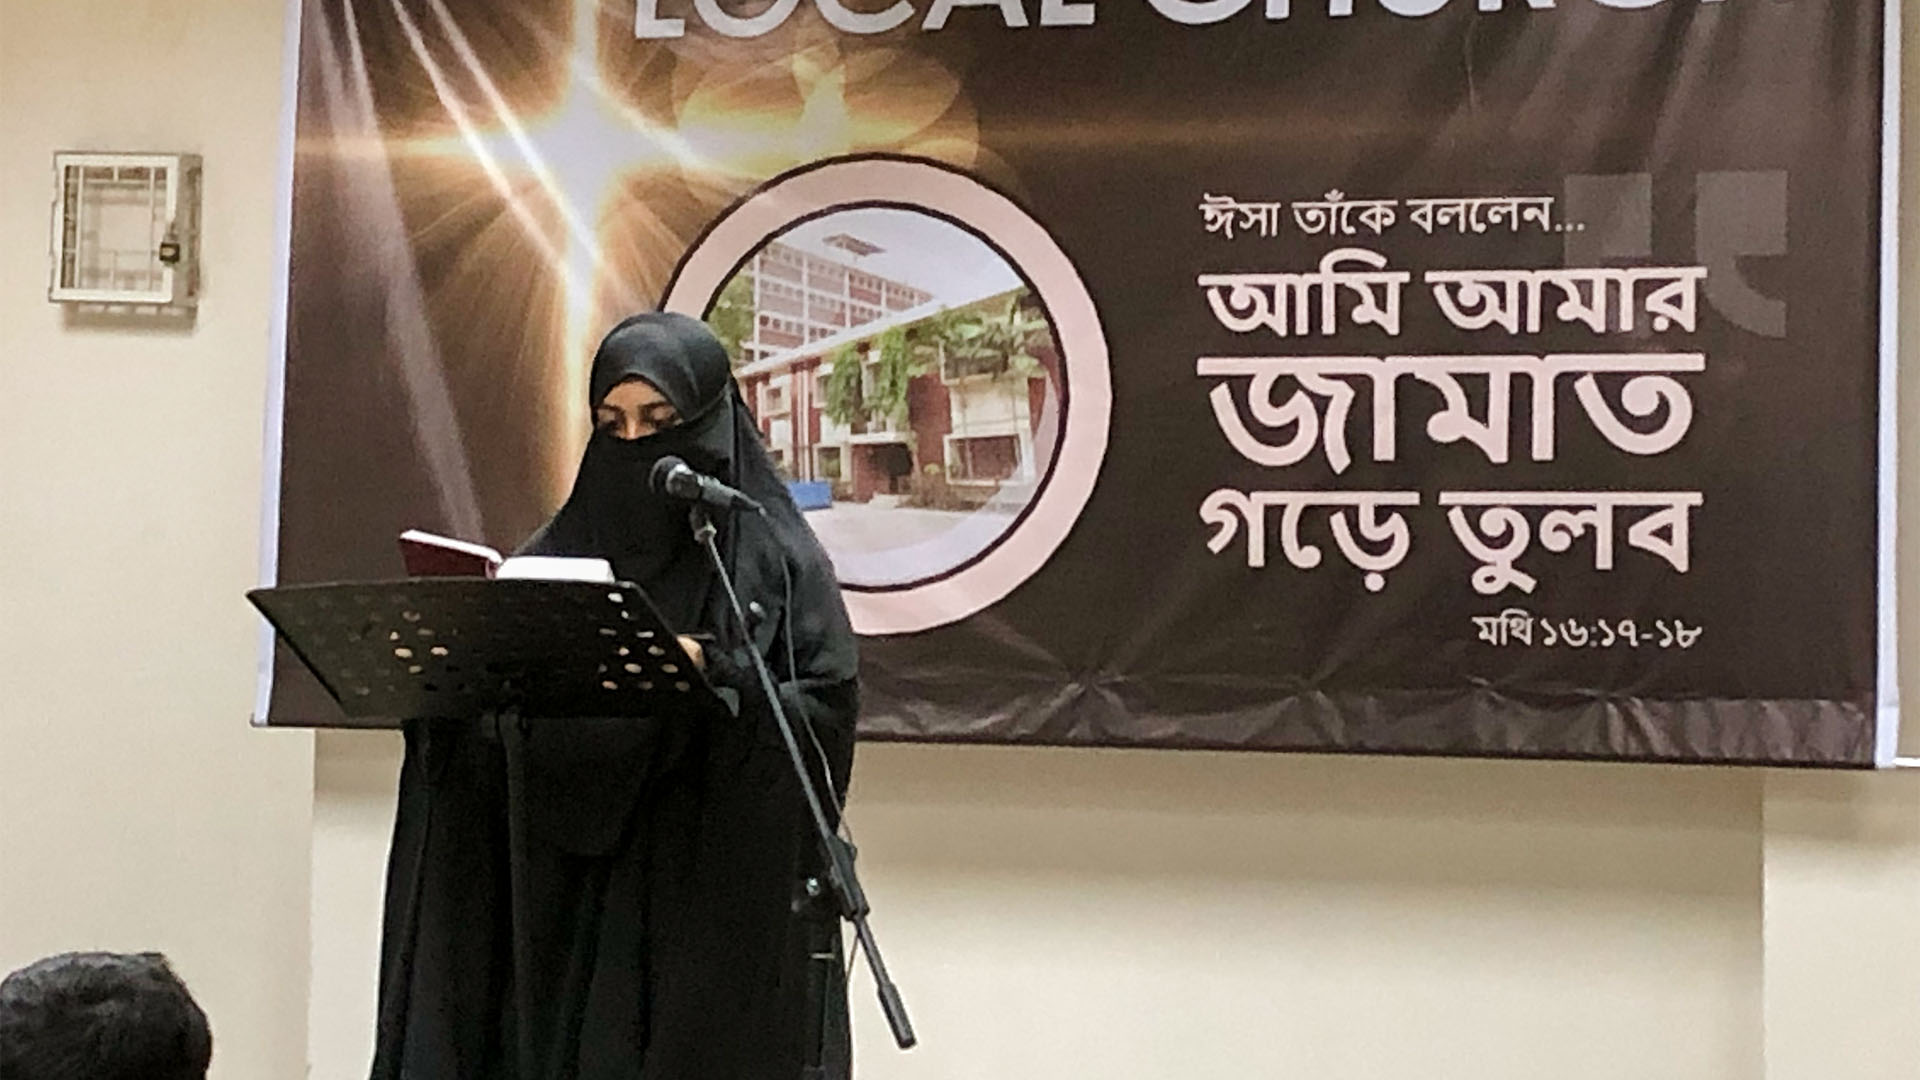 A woman in a hijab reads scripture at the front of her church